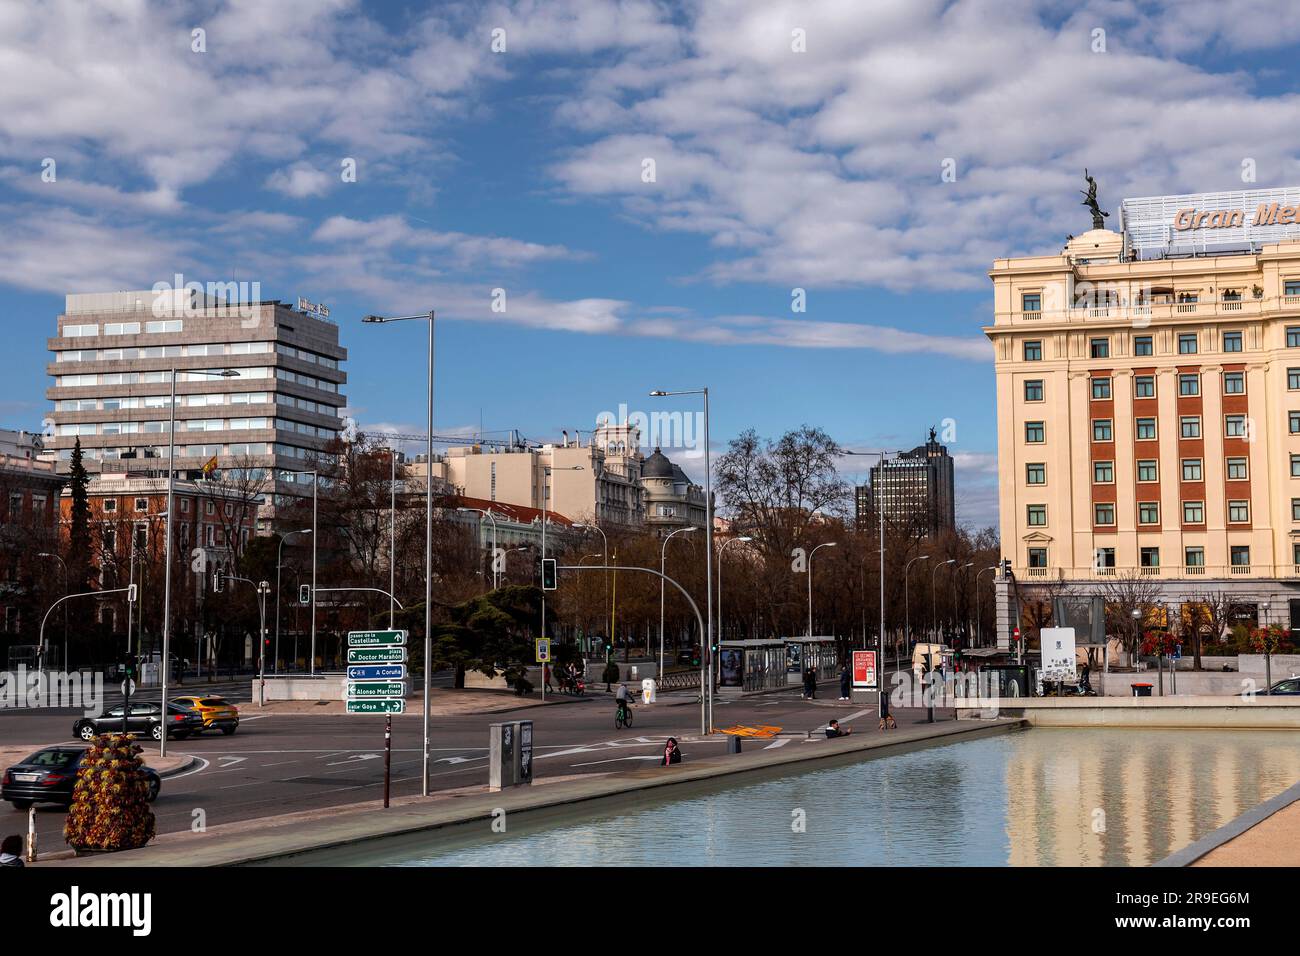 Madrid, Spain - FEB 19, 2022: Plaza de Colon, Columbus Square, is located in the encounter of Chamberi, Centro and Salamanca districts of Madrid, Spai Stock Photo